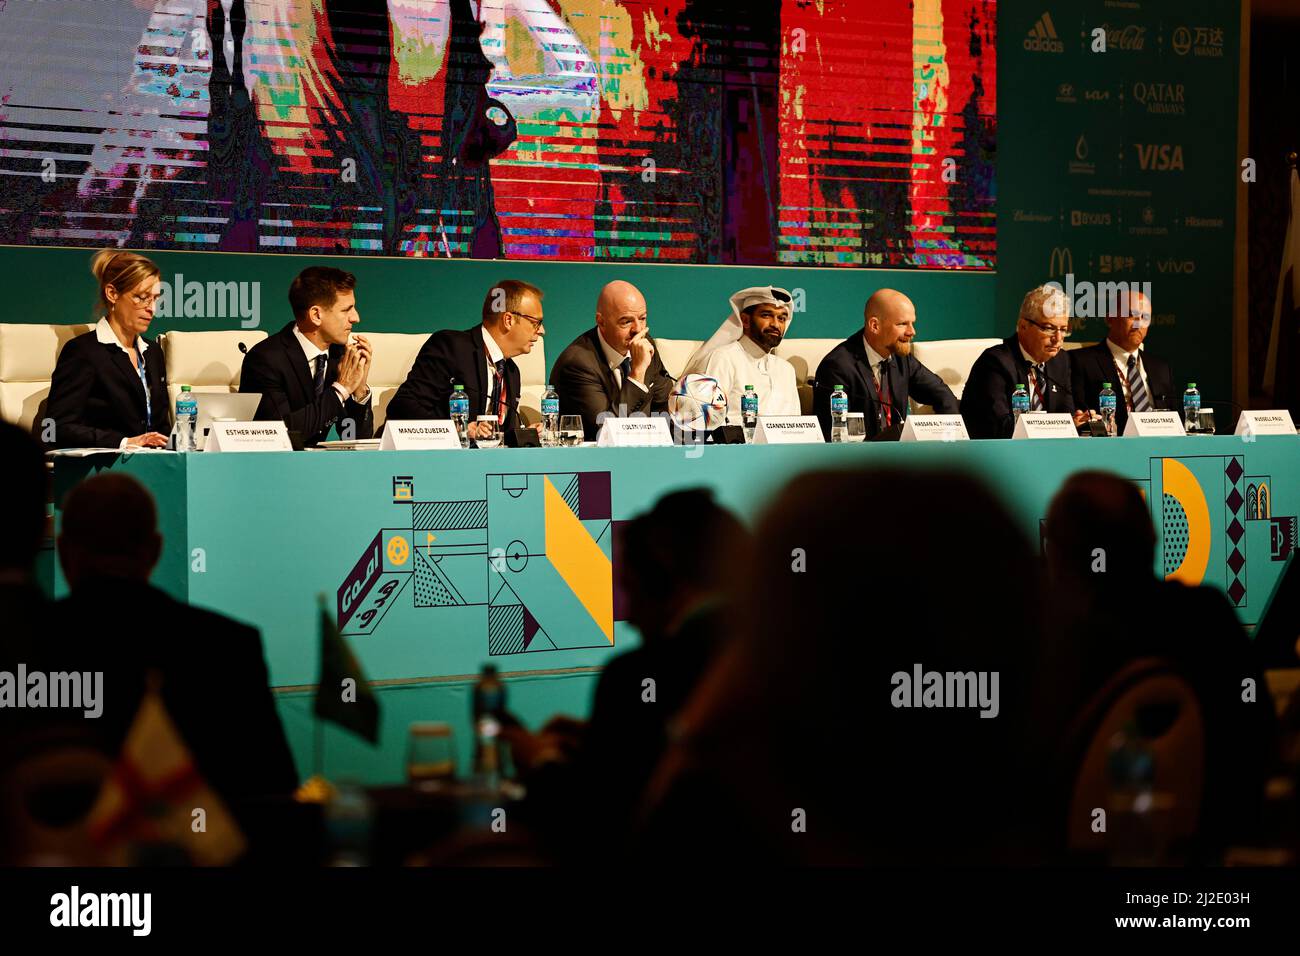 Soccer Football - World Cup - FIFA Teams Seminar - Kimpinsky Hotel, Doha, Qatar - April 1, 2022 FIFA president Gianni Infantino and Secretary General of the Supreme Committee for Delivery and Legacy, Hassan Al-Thawadi during the FIFA Teams Seminar REUTERS/Hamad I Mohammed Stock Photo